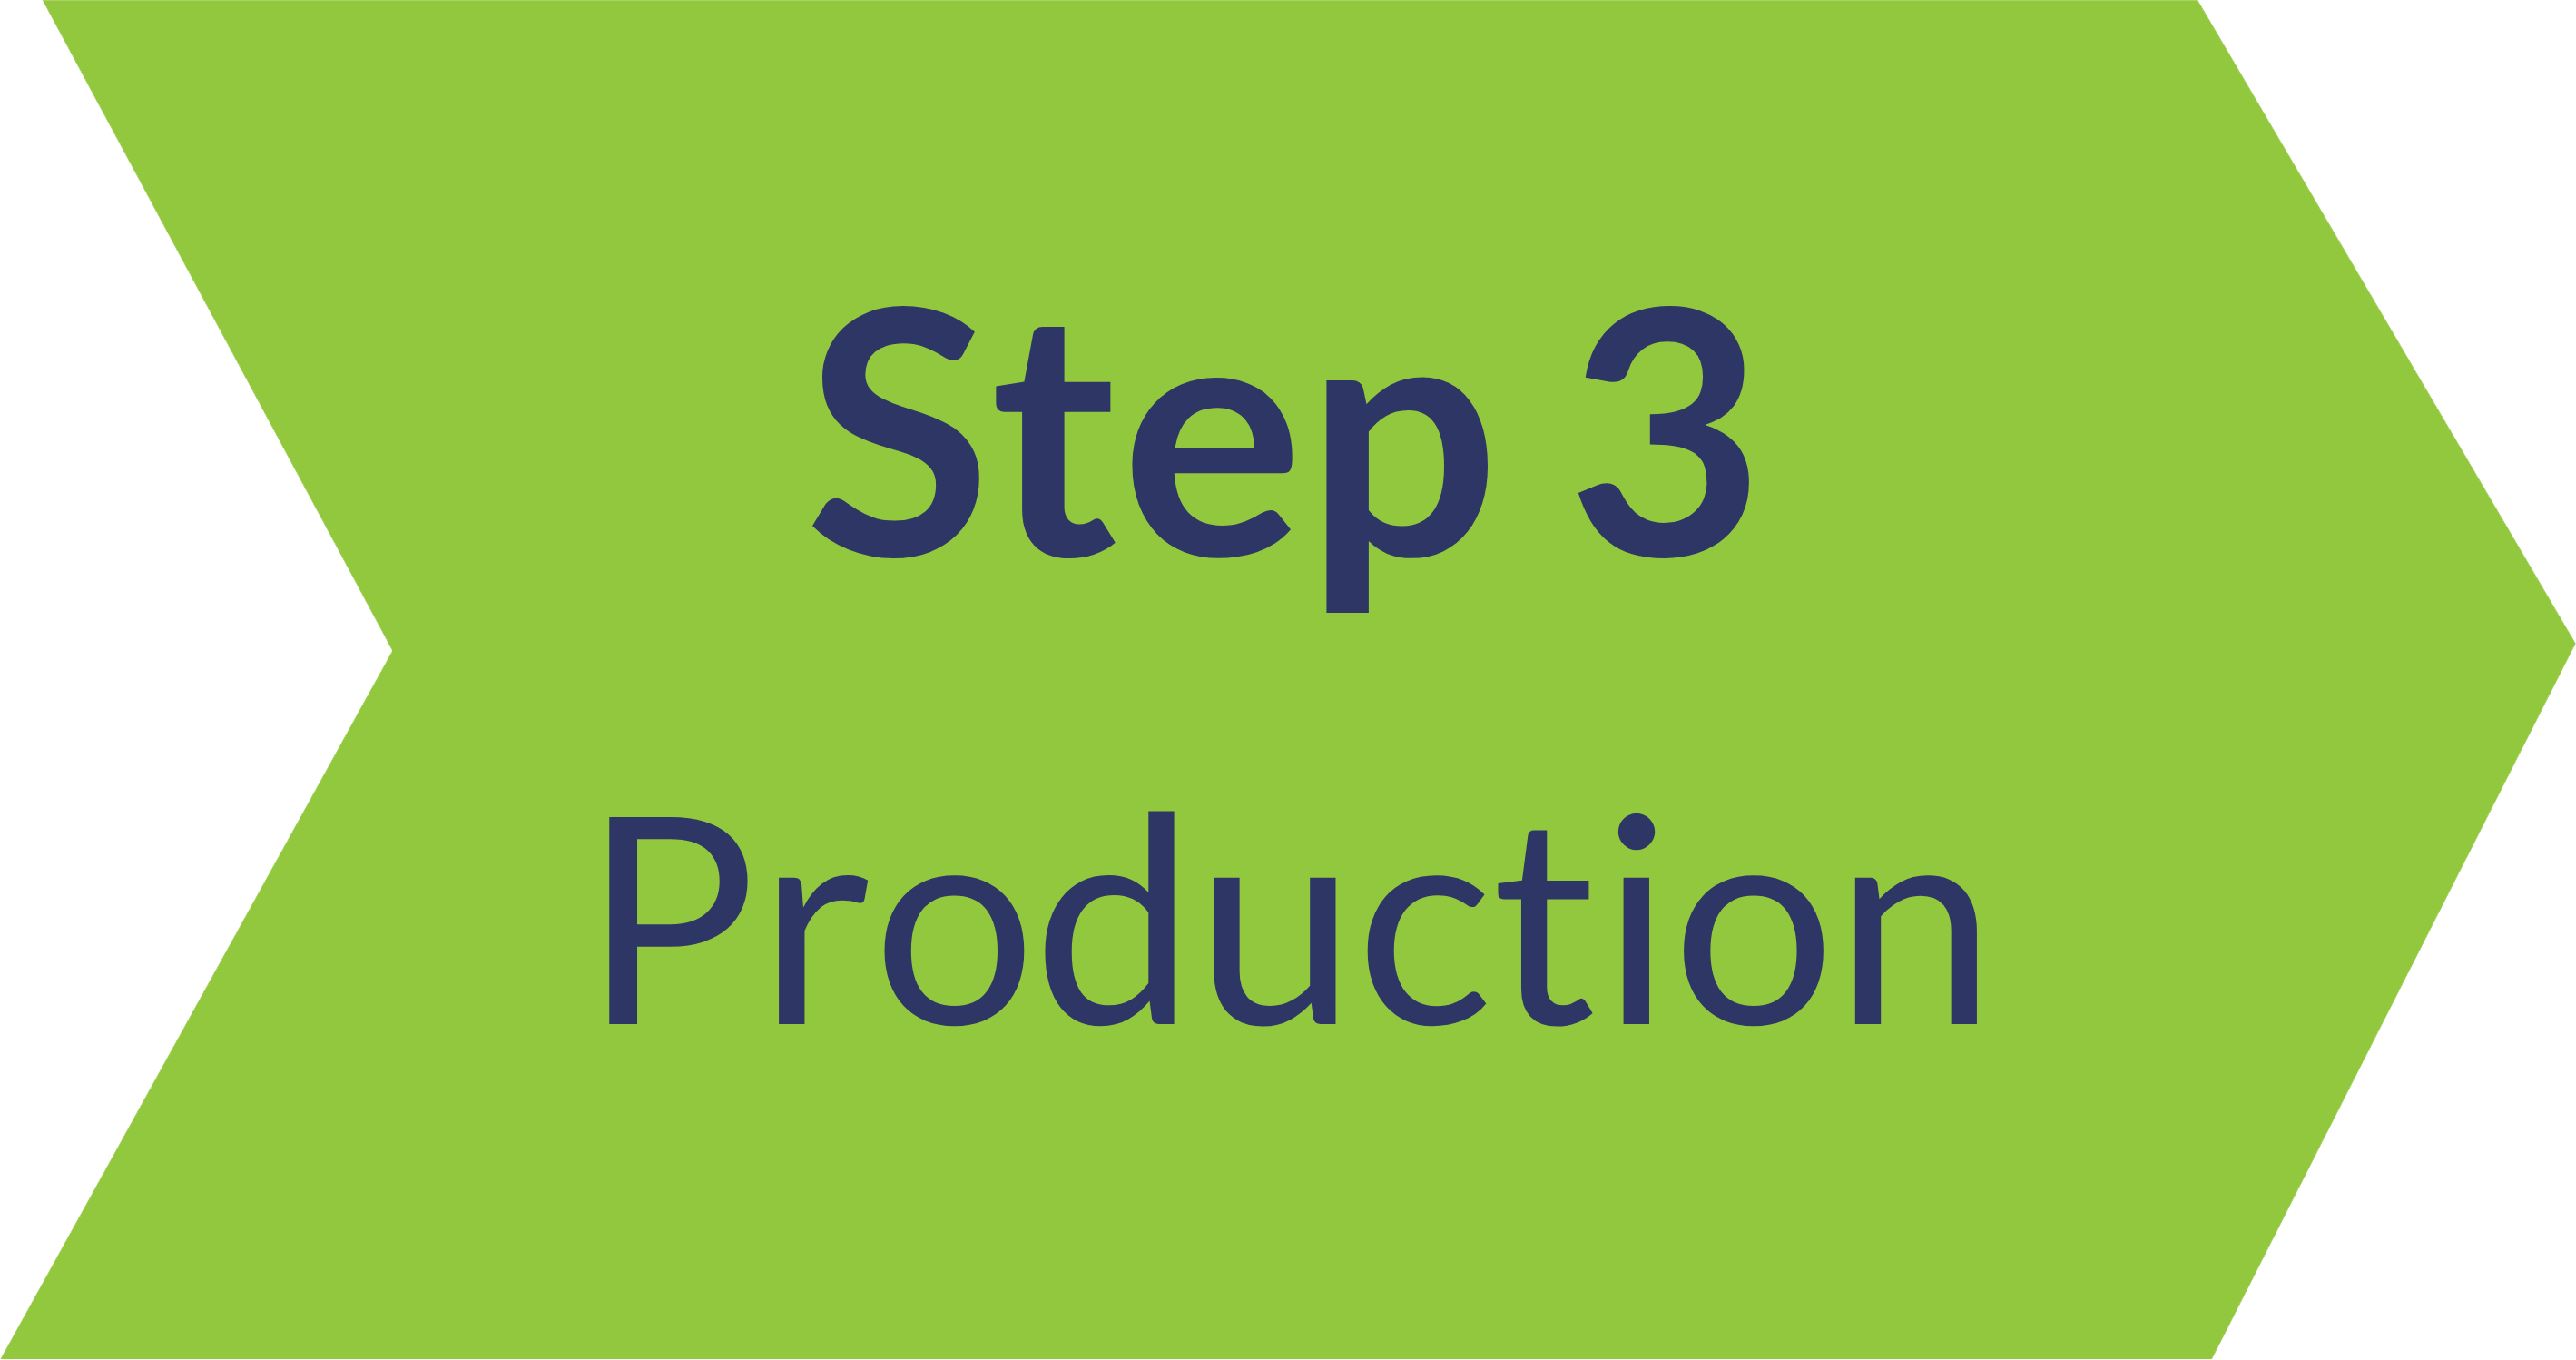 Step 3 - Production